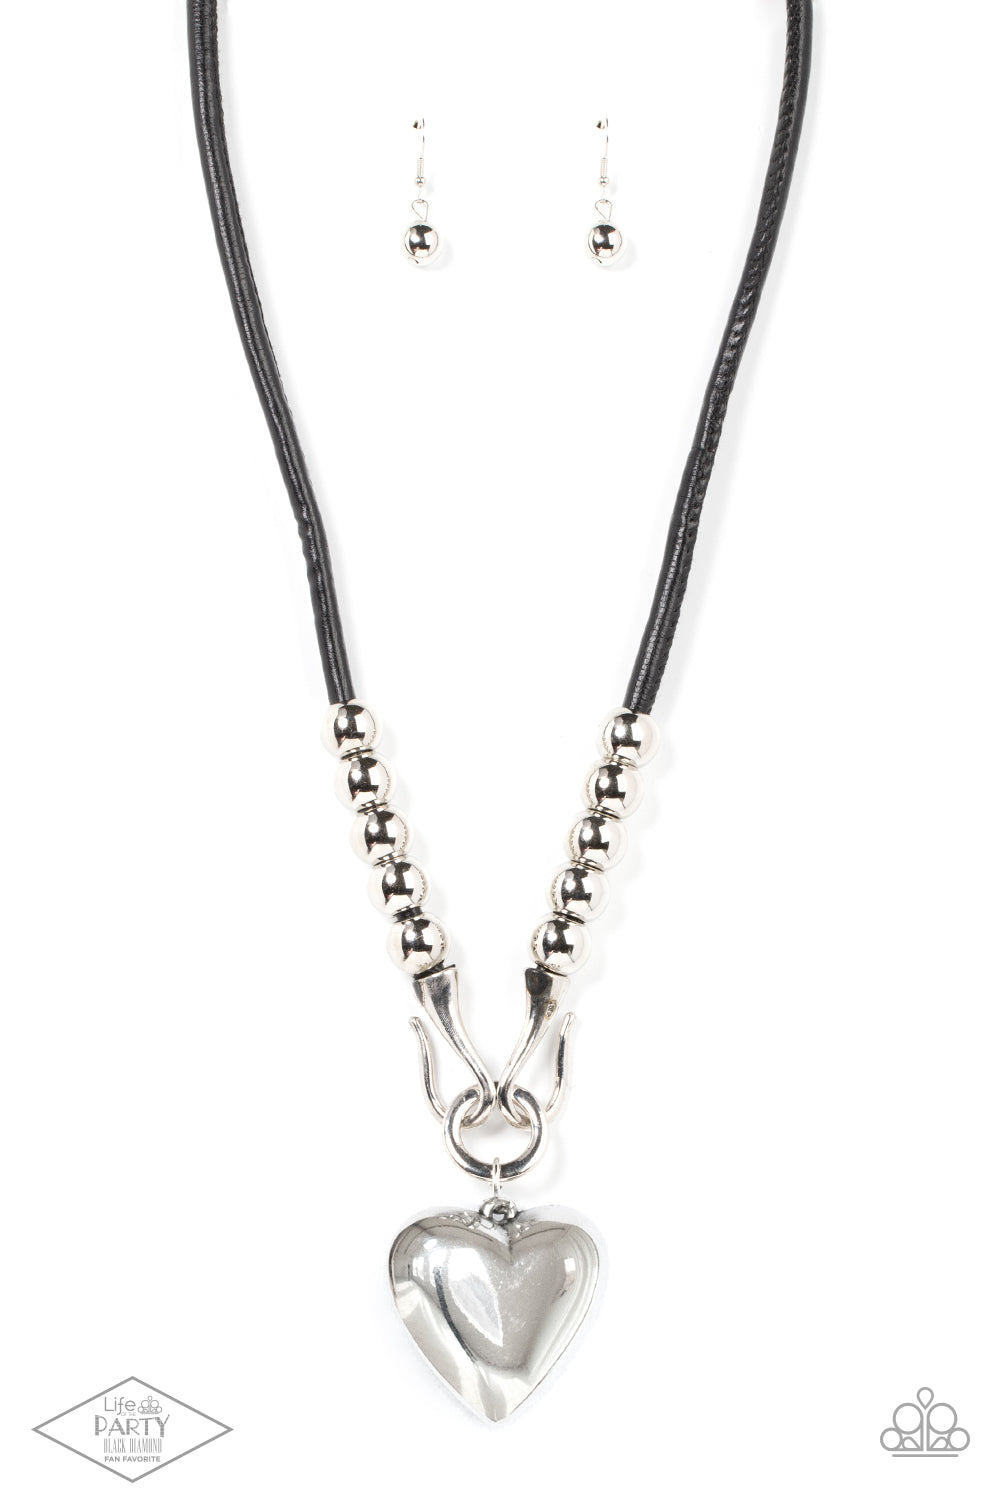 Paparazzi Forbidden Love - Black Necklace - Black Pendant Necklace Chunky silver beads, a silver heart pendant swings from a silver hook-like fittings that attach to a bold leather cord across the chest for a heartbreaker look.  Sold as one individual black pendant necklace.